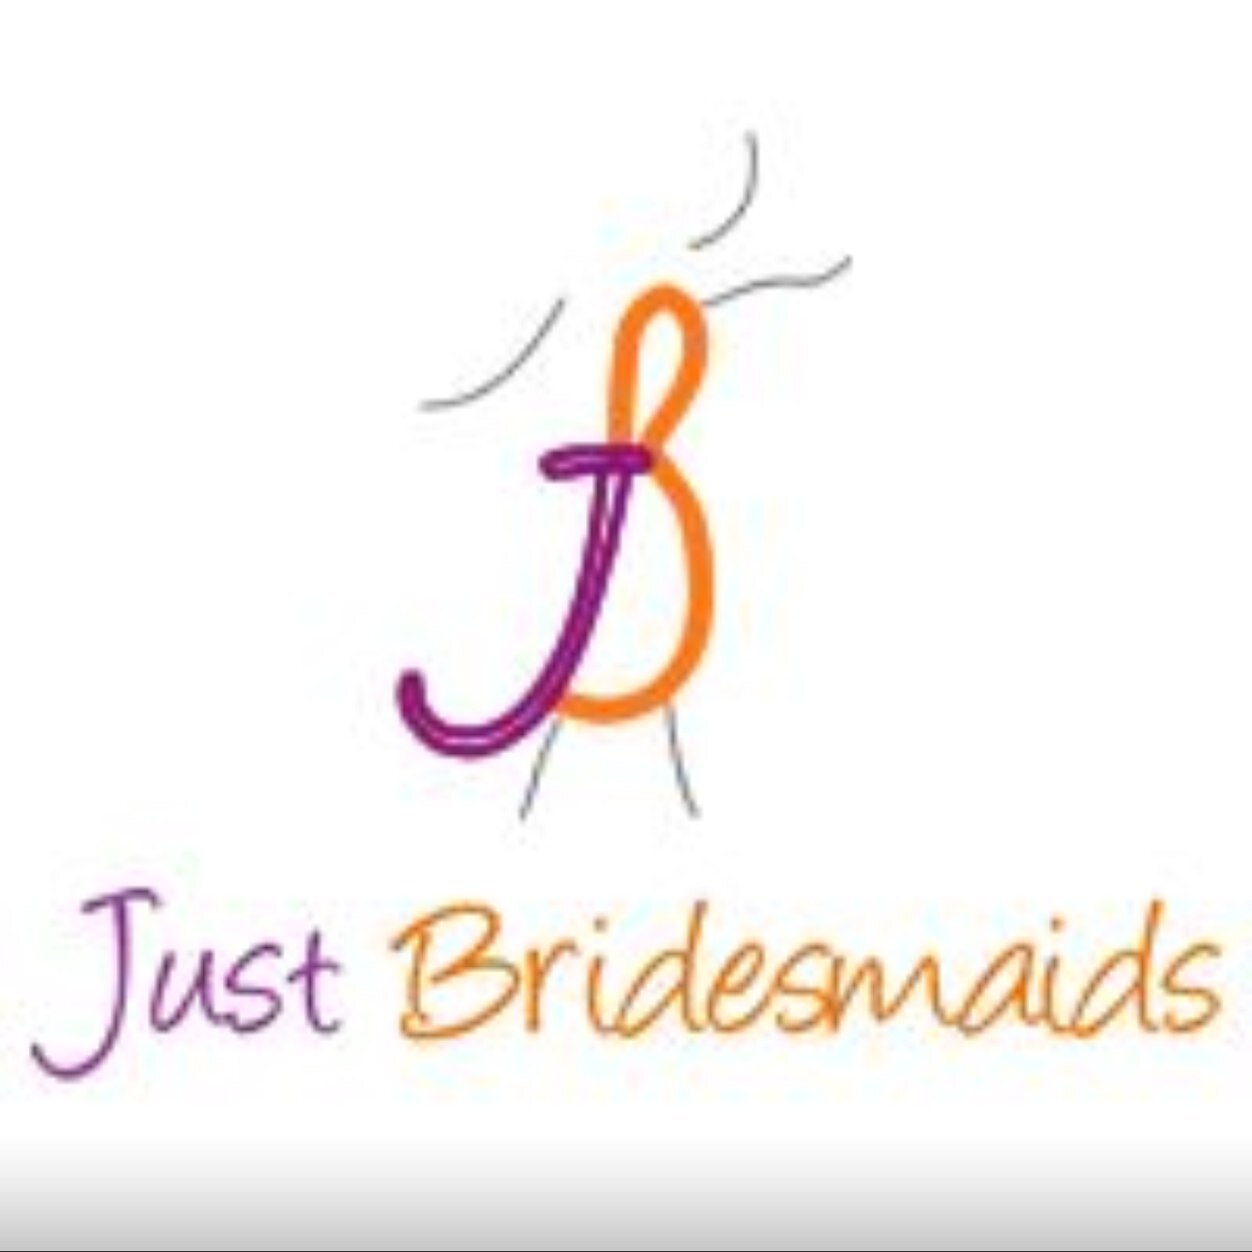 Just Bridesmaids is a unique shop specialising in Bridesmaids dresses which are available in many different styles, colours and sizes.